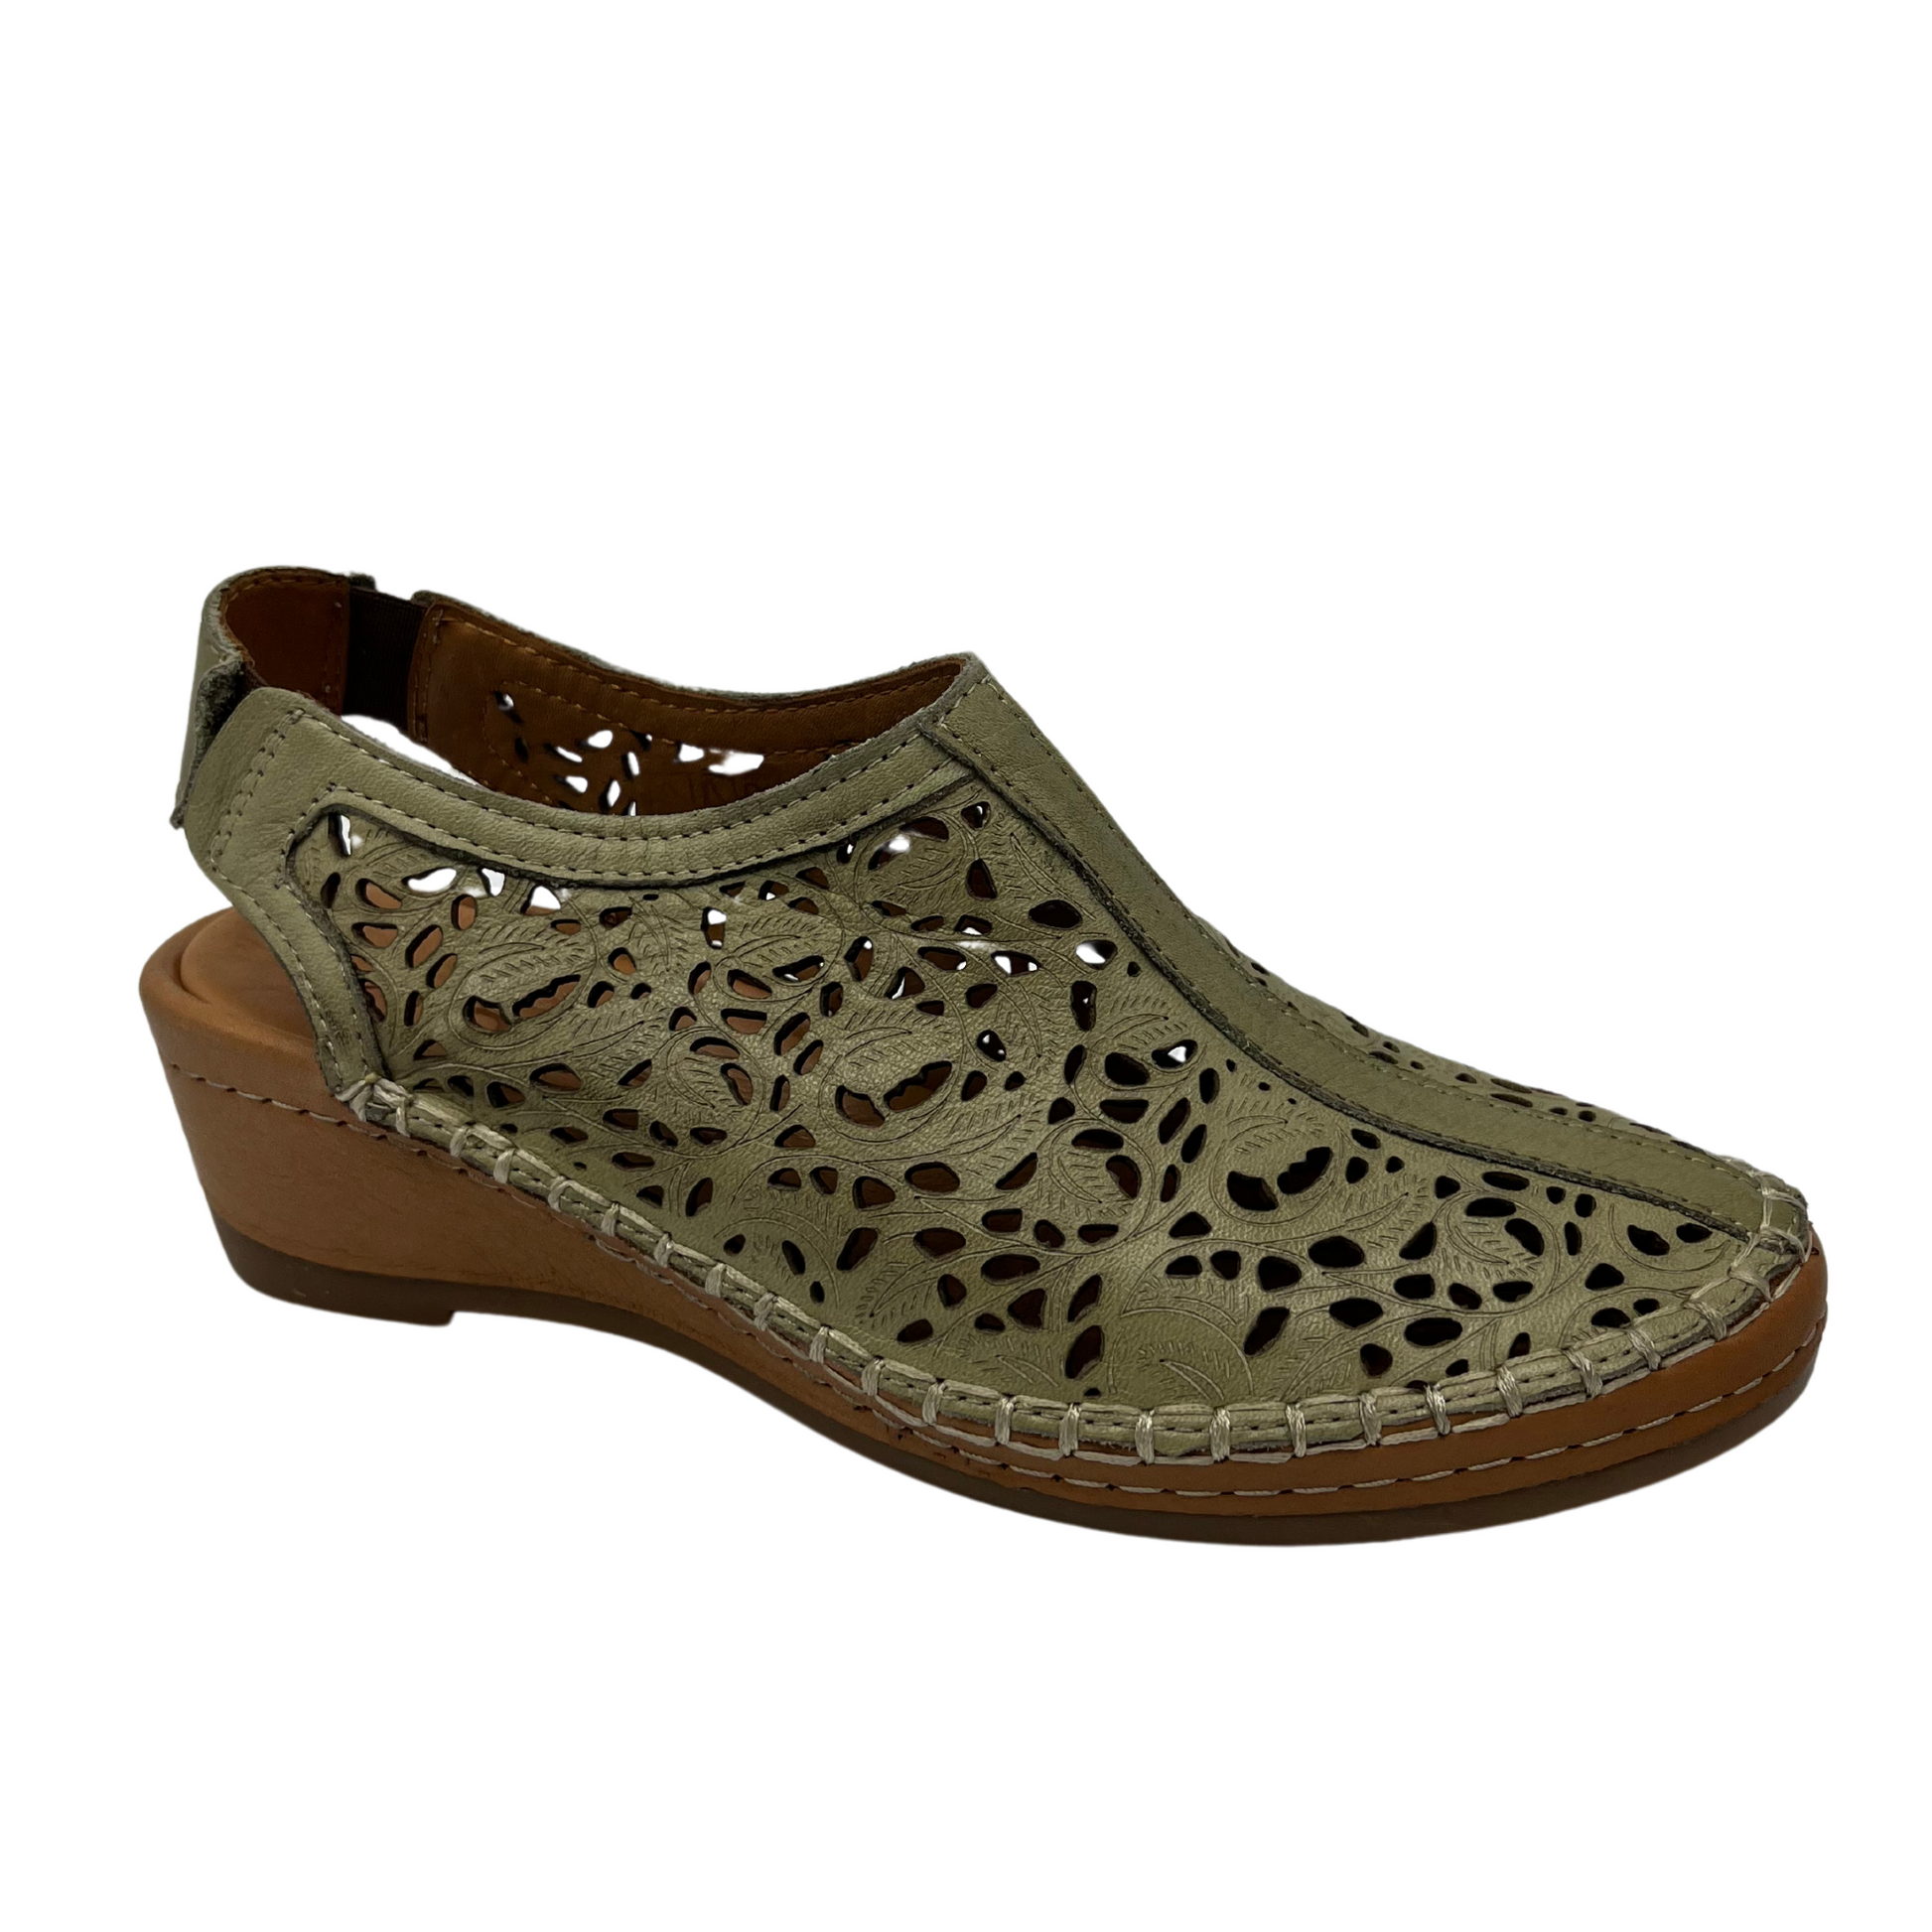 45 degree angled view of light green leather shoe with cut out design with low wedge heel